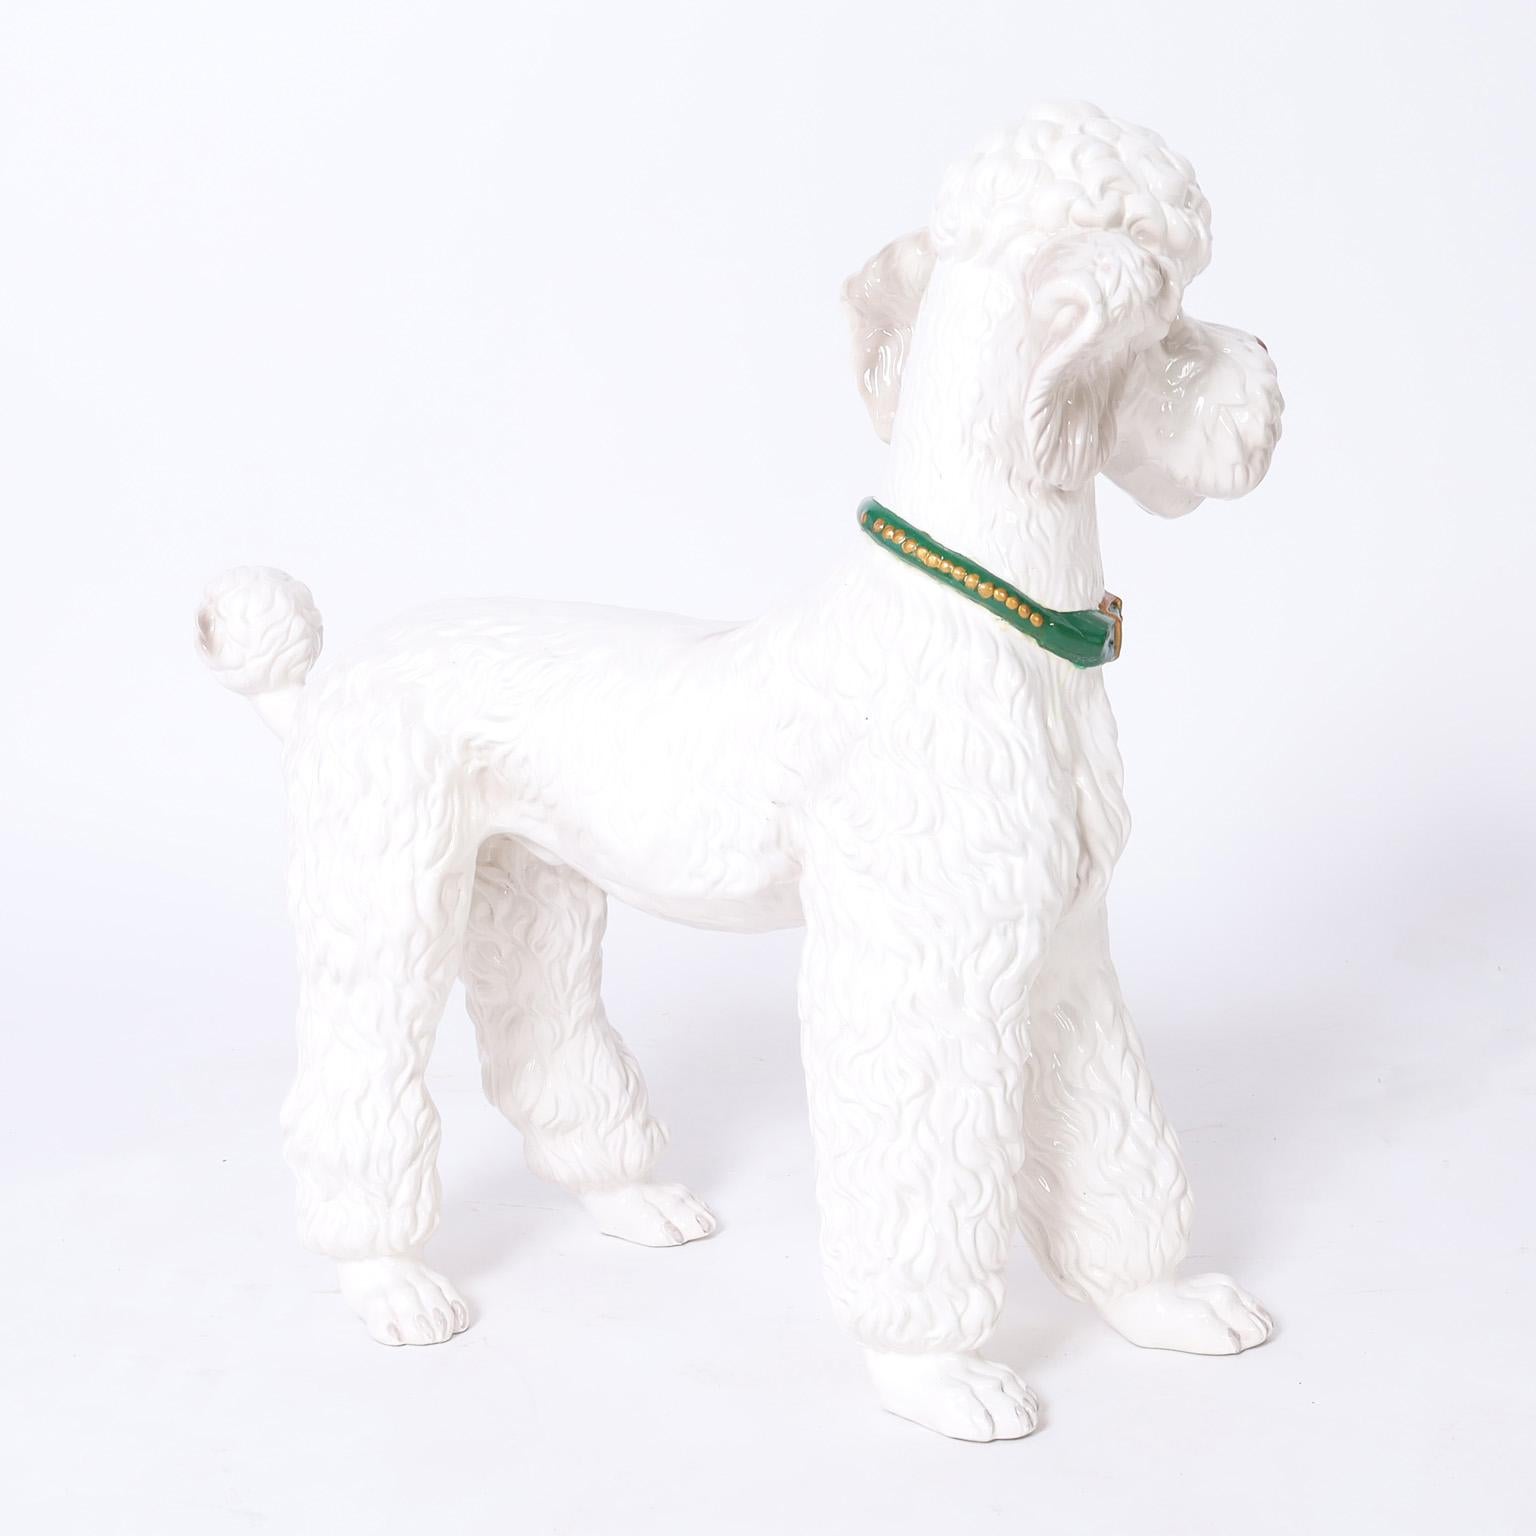 Life size vintage poodle sculpture crafted in ceramic, decorated and glazed with aplomb. Interesting note on the bottom of a paw.